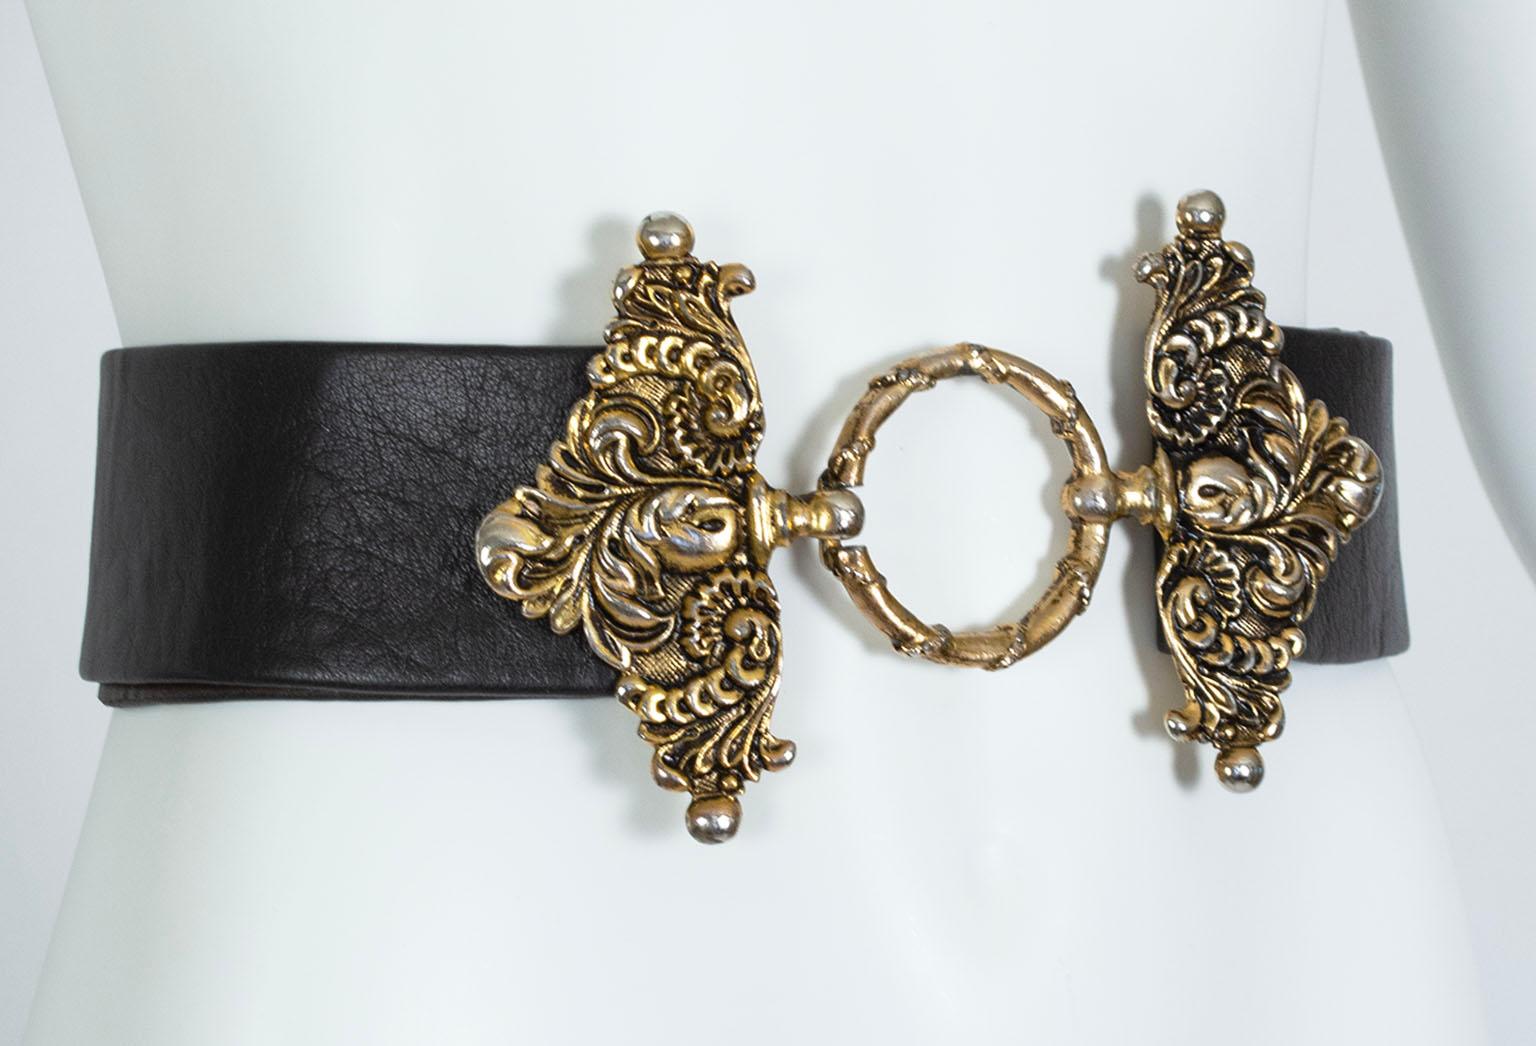 Guaranteed to be the focal point of any outfit, this belt is a hybrid of a traditional wide belt and a waist cincher thanks to its oversized scrolling gold buckle. Featuring two gold triangles with Rococo relief, the buckle clasps invisibly around a